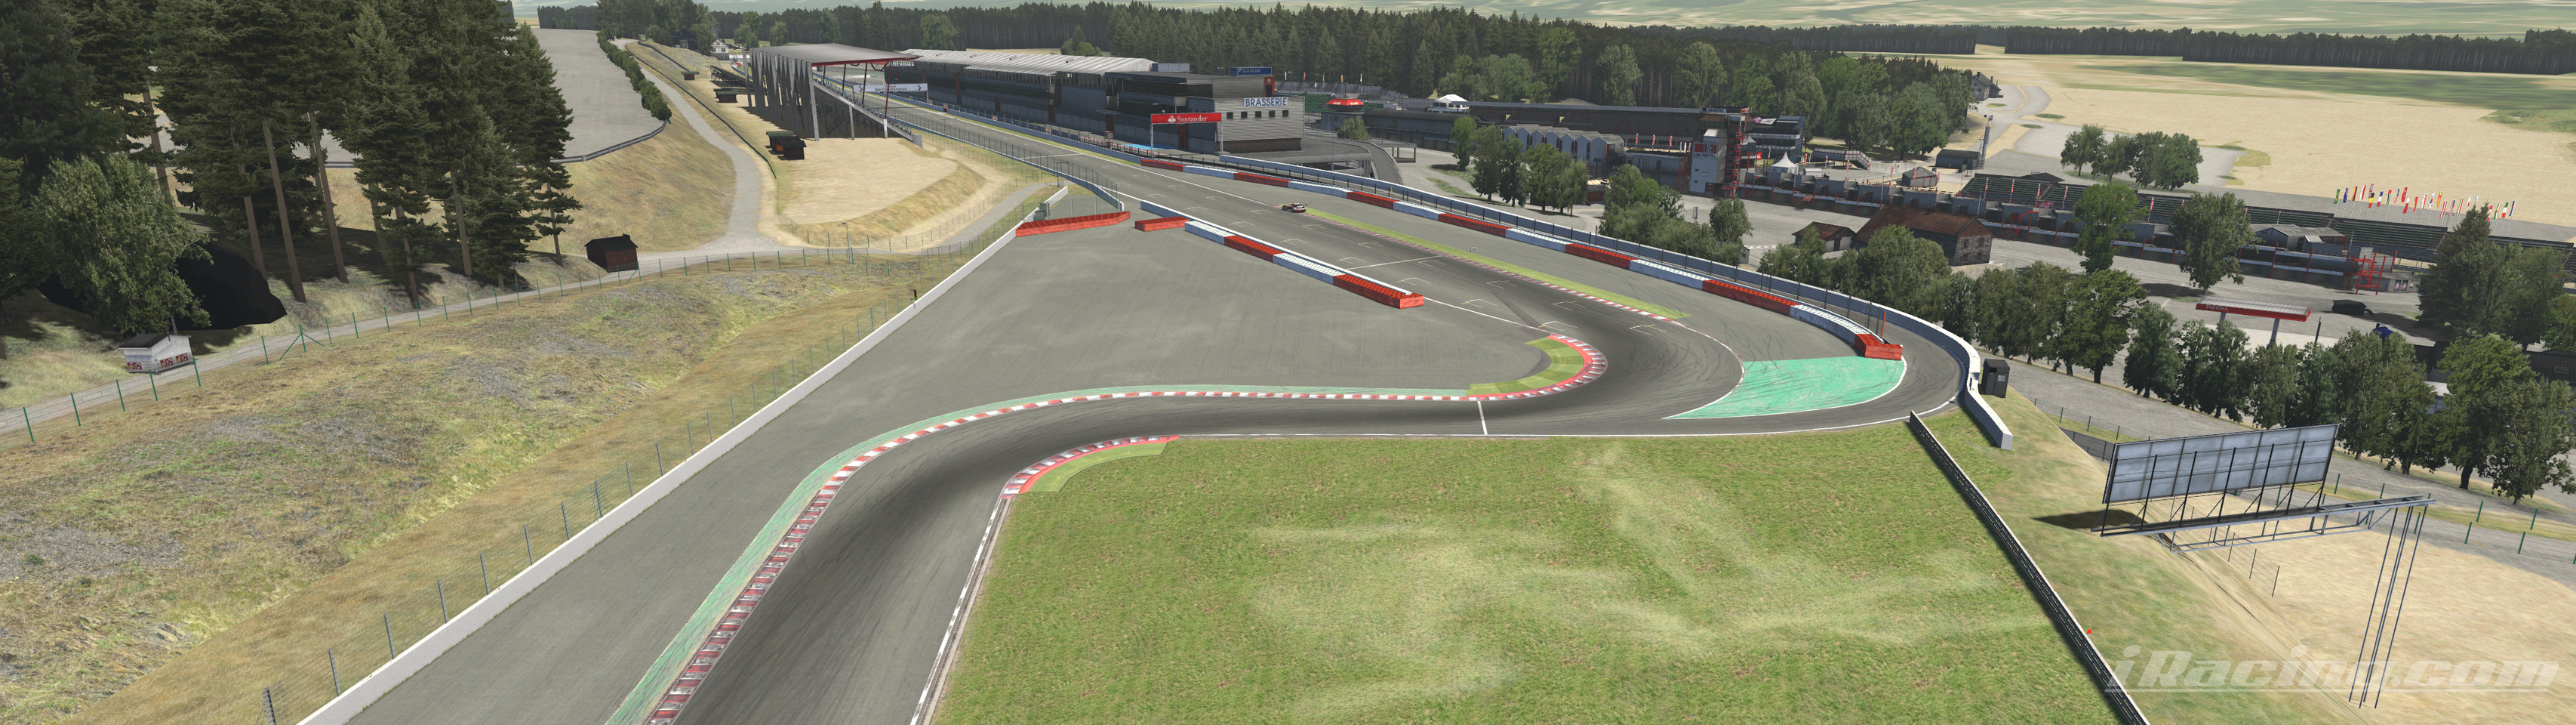 Chicane Overview